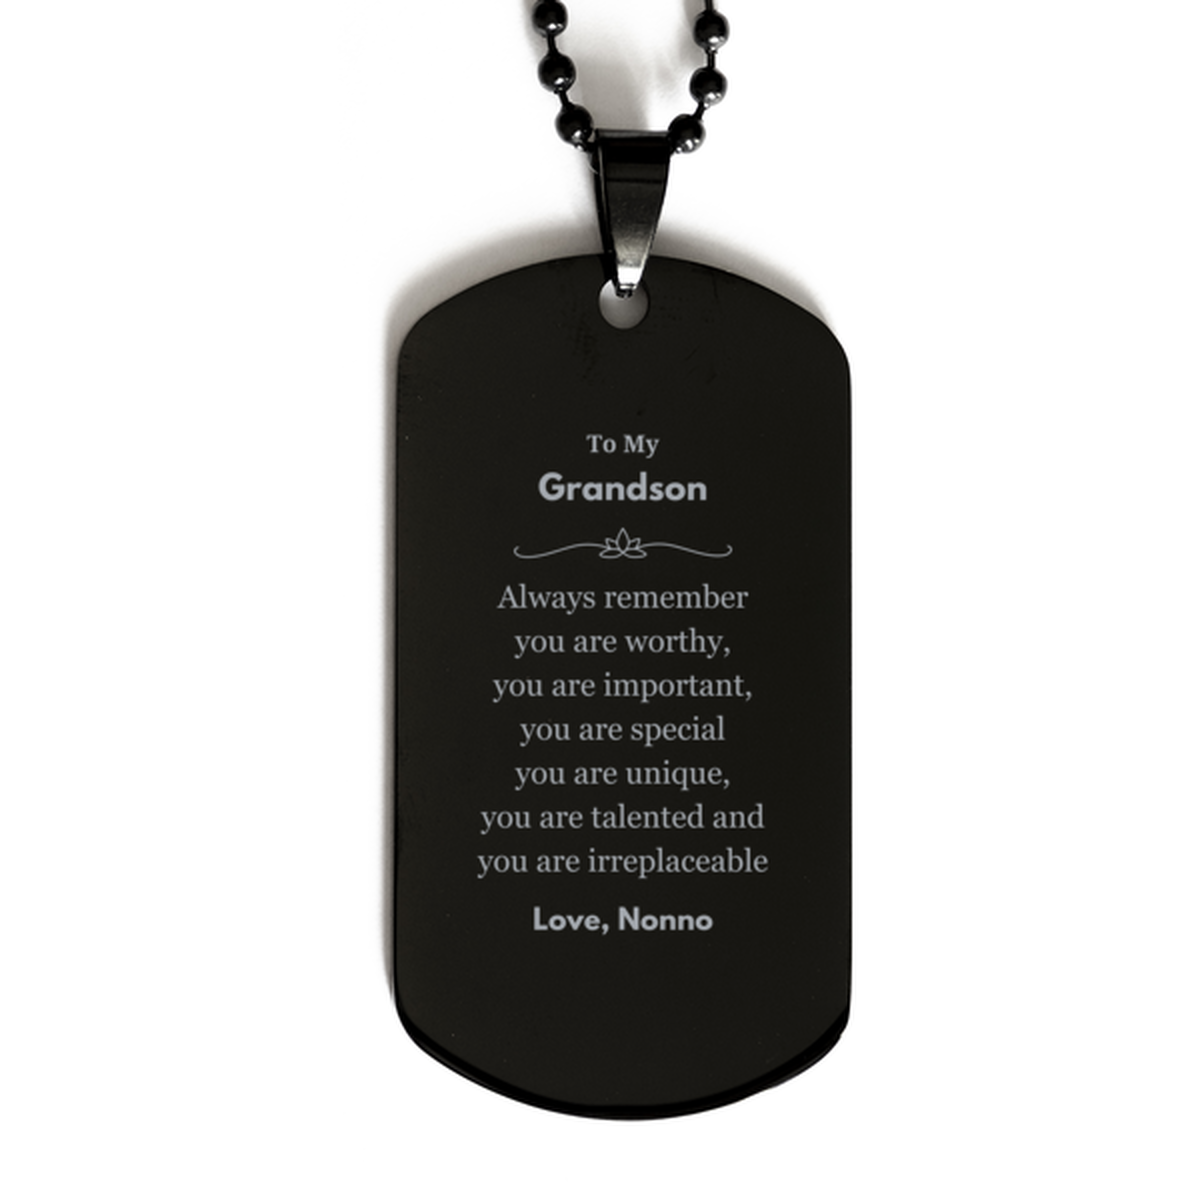 Grandson Birthday Gifts from Nonno, Inspirational Black Dog Tag for Grandson Christmas Graduation Gifts for Grandson Always remember you are worthy, you are important. Love, Nonno